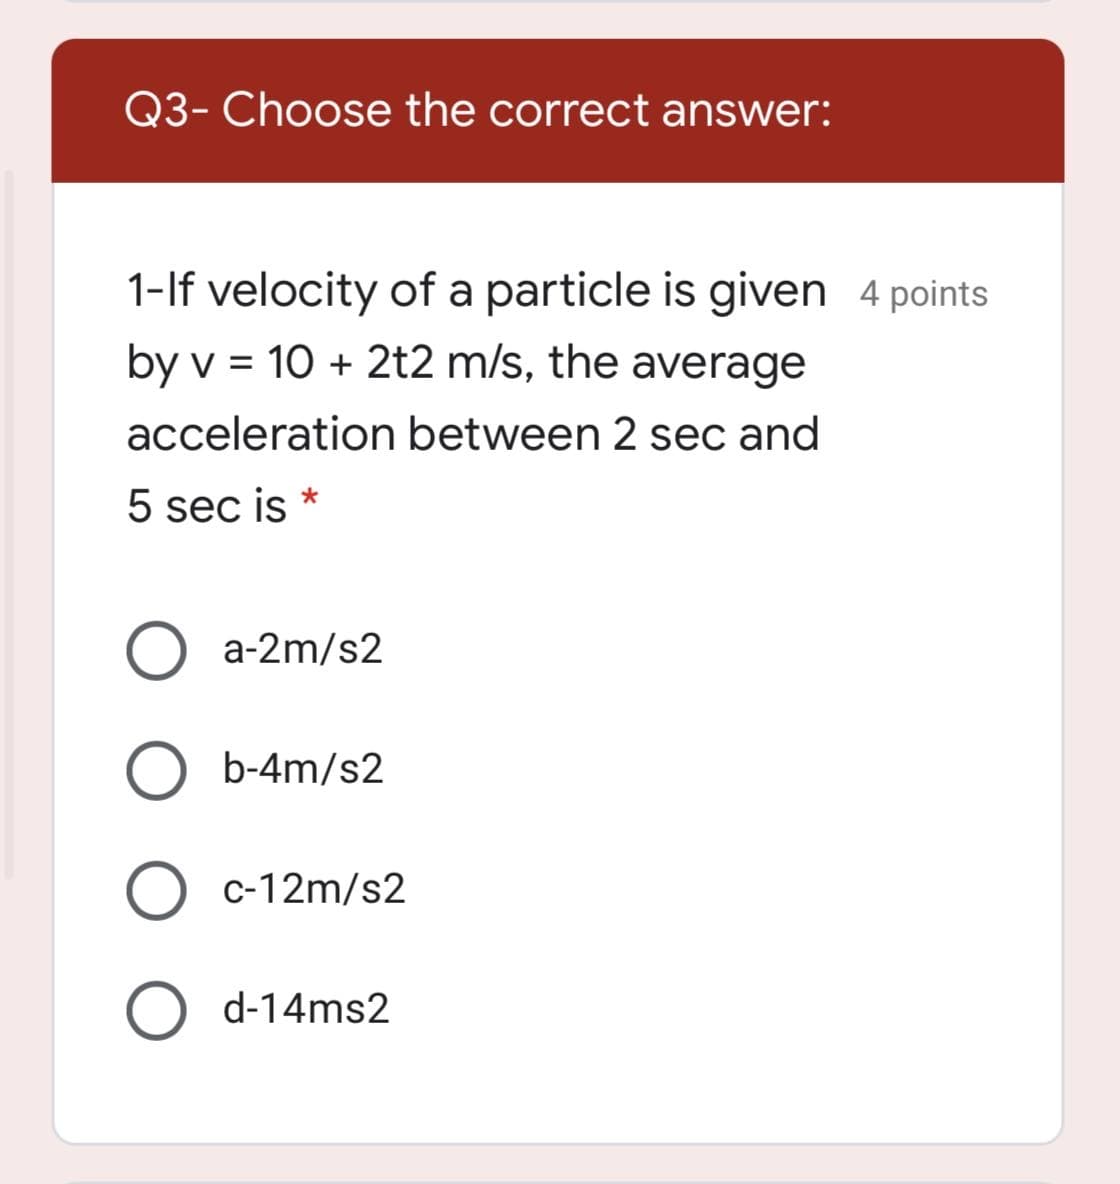 Q3- Choose the correct answer:
1-If velocity of a particle is given 4 points
by v = 10 + 2t2 m/s, the average
acceleration between 2 sec and
5 sec is *
O a-2m/s2
b-4m/s2
c-12m/s2
O d-14ms2
